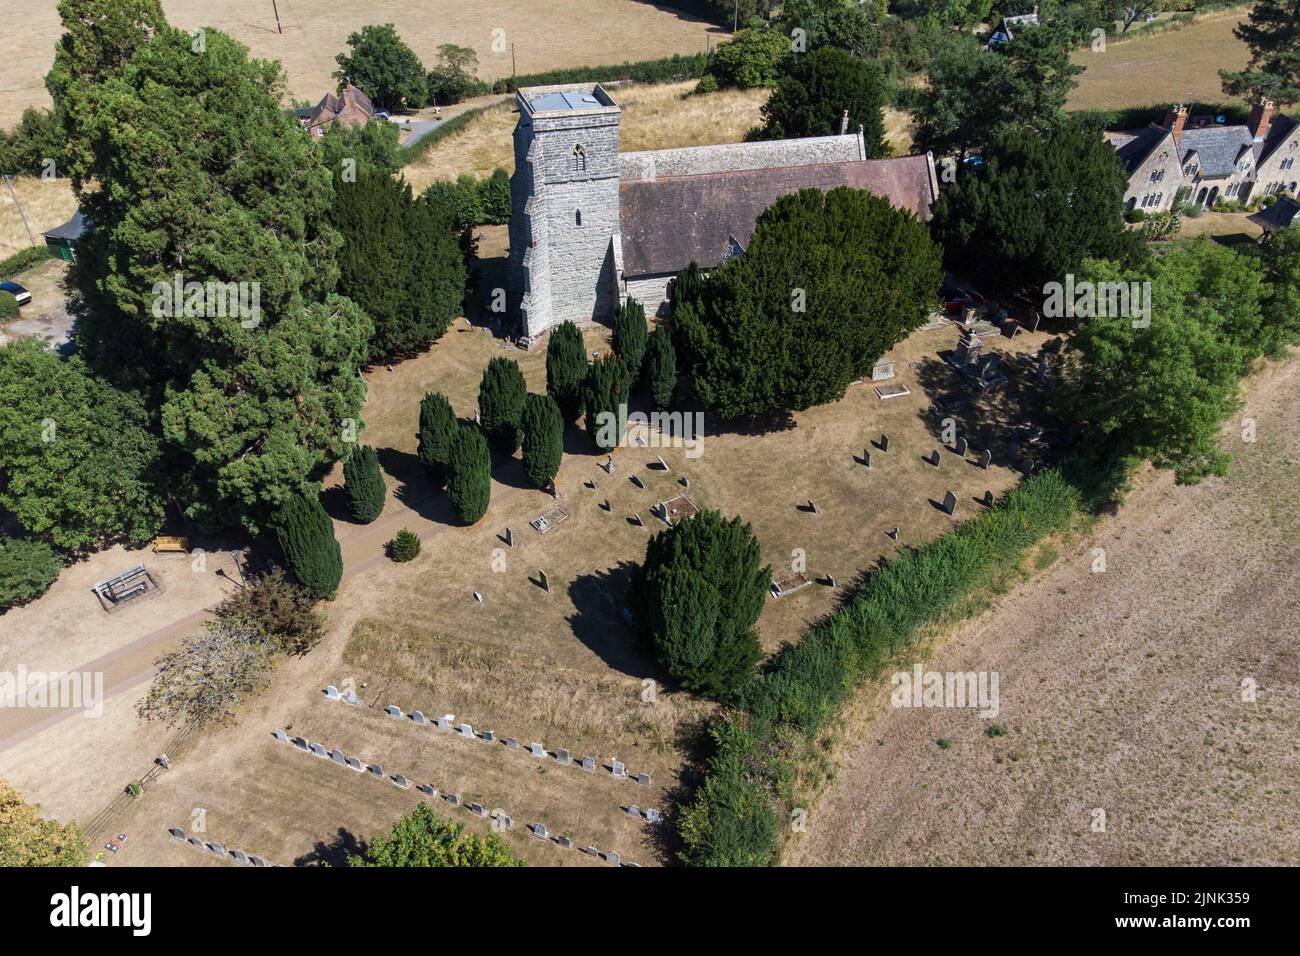 Forthampton, Gloucestershire August 12th 2022 - The small historic hamlet of Forthampton in Gloucestershire has been hit hard by drought conditions with 2 ponds dried up and the church, St. Mary the Virgin, is surrounded by brown dry grass. Credit: SCOTT CM/Alamy Live News Stock Photo